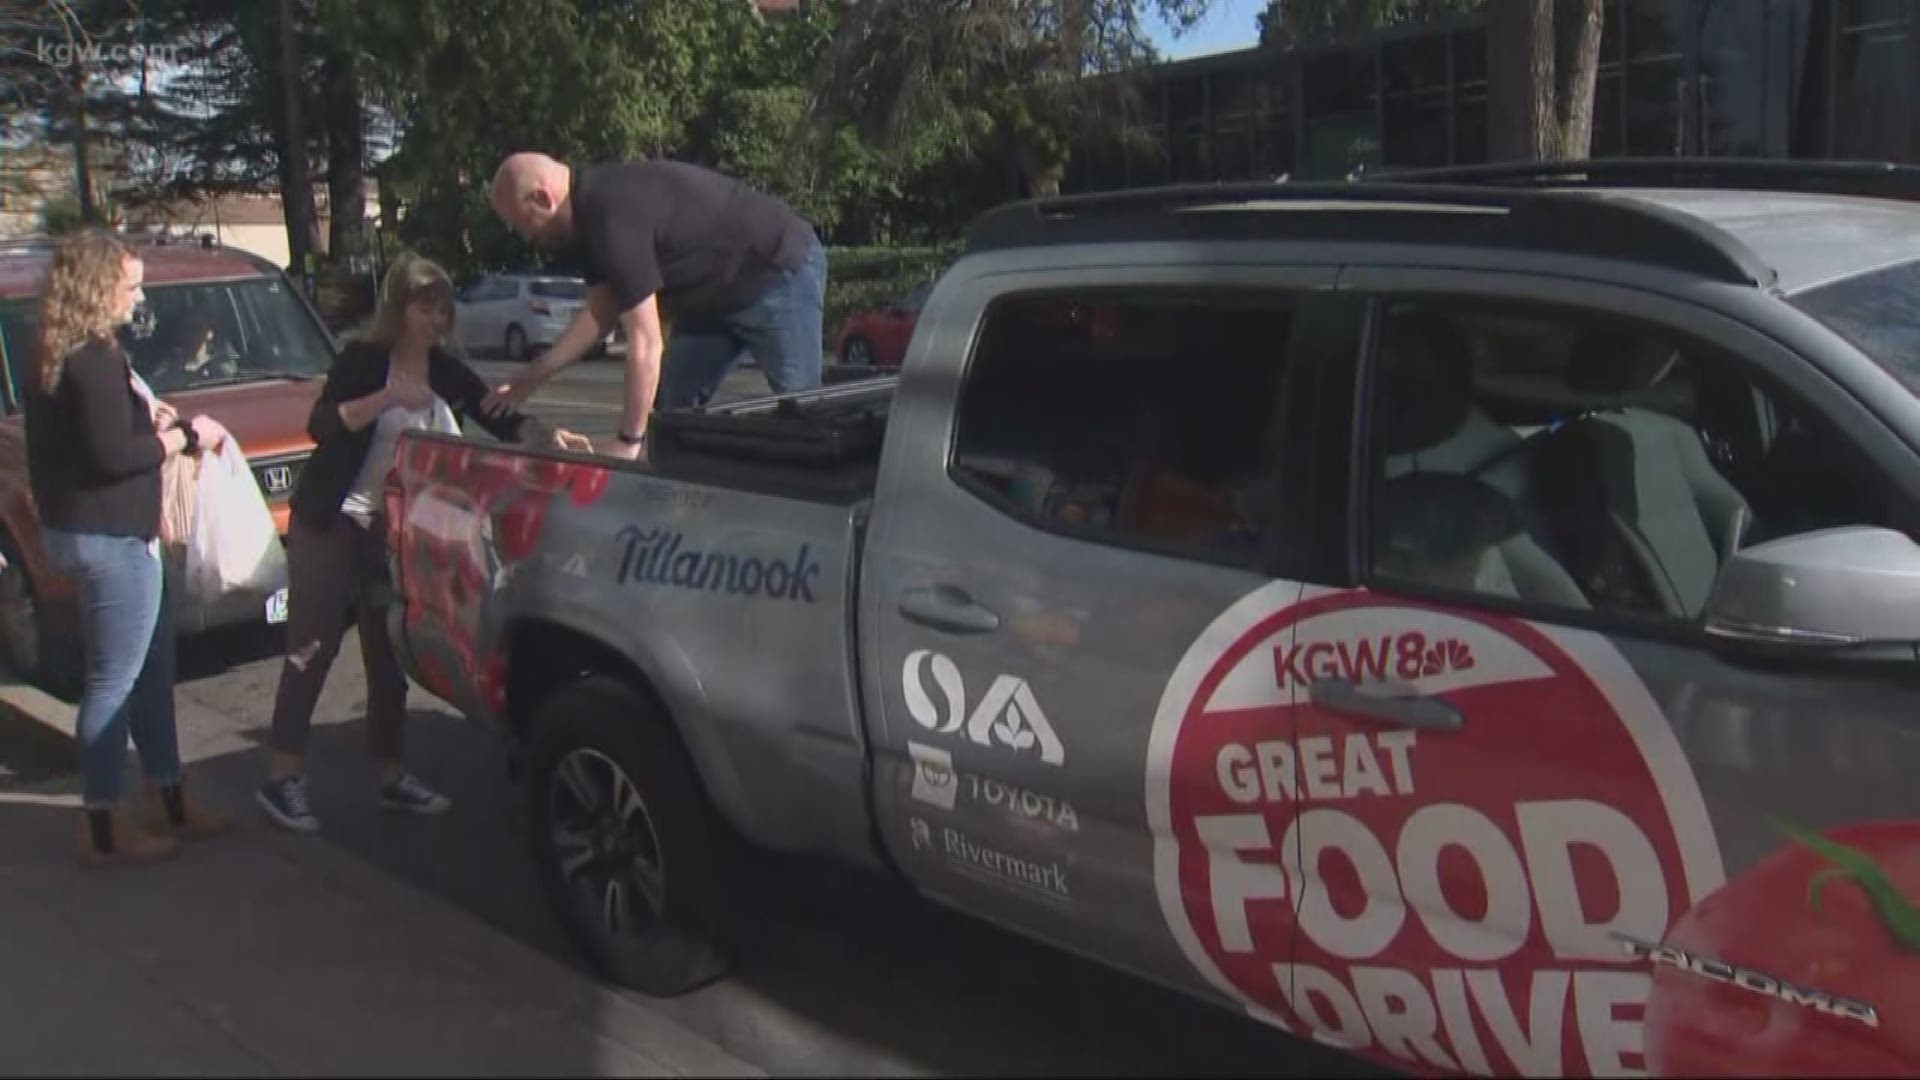 There is still more than a week left to contribute to the KGW Great Food Drive. Employees at Rivermark Community Credit Union are loading up the food drive truck with all the food items donated at Rivermark branches so far.
kgw.com/fooddrive